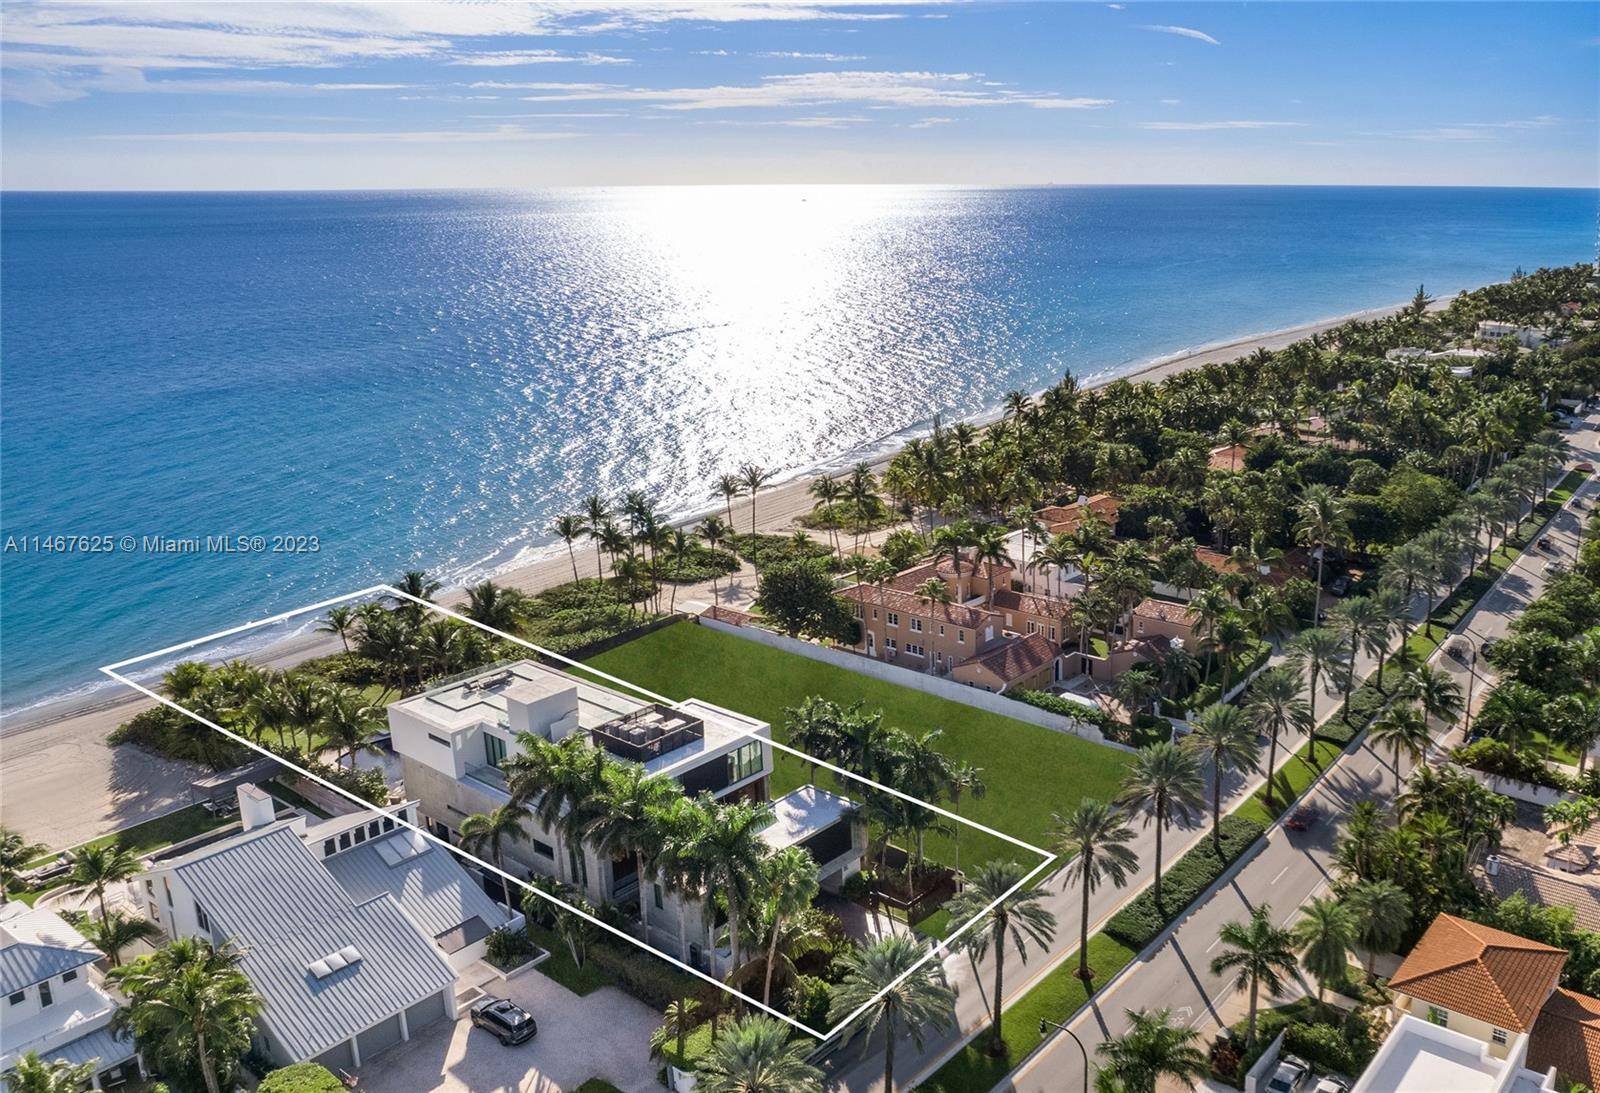 Spectacular oceanfront mansion in exclusive Golden Beach, situated directly on the Atlantic Ocean !